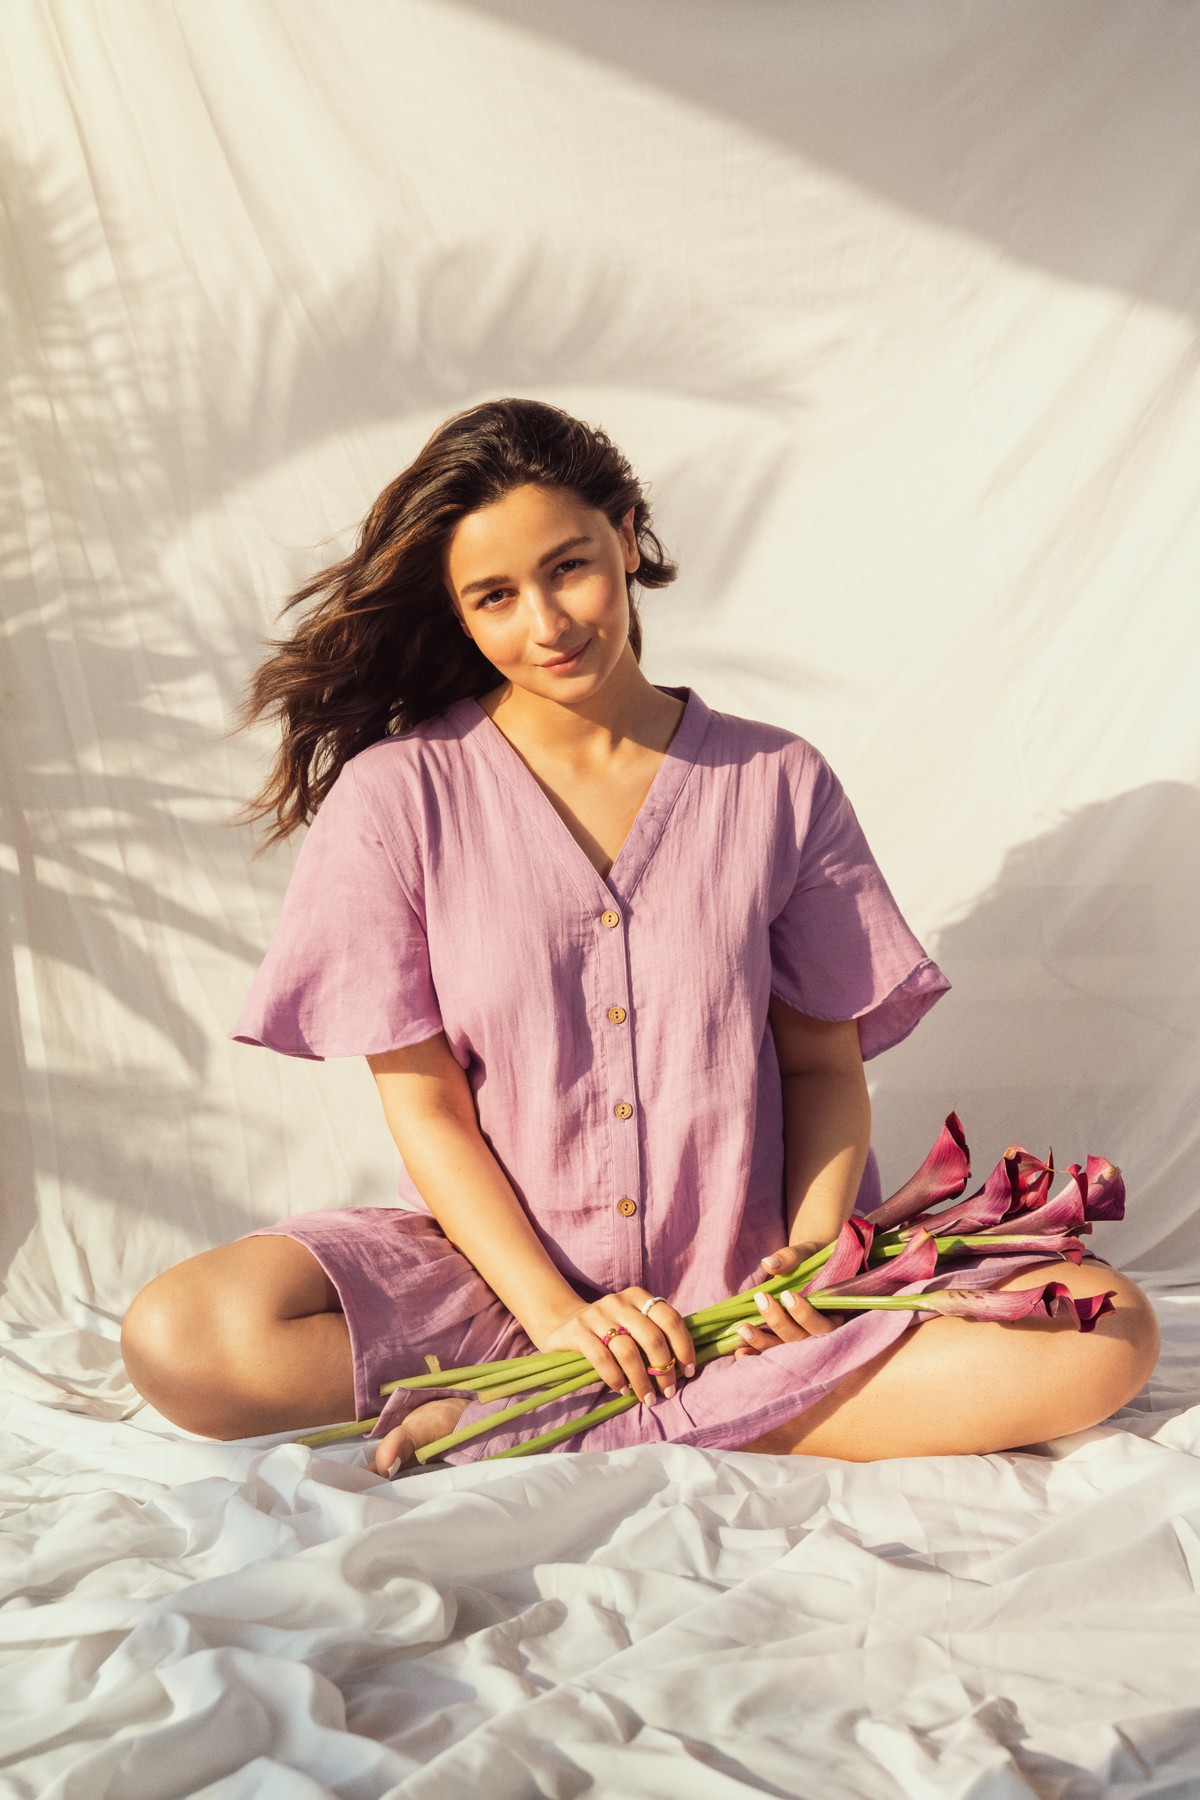 Www Xxx Alia Com - Why Love Dictates Life For Bollywood's Finest Young Superstar